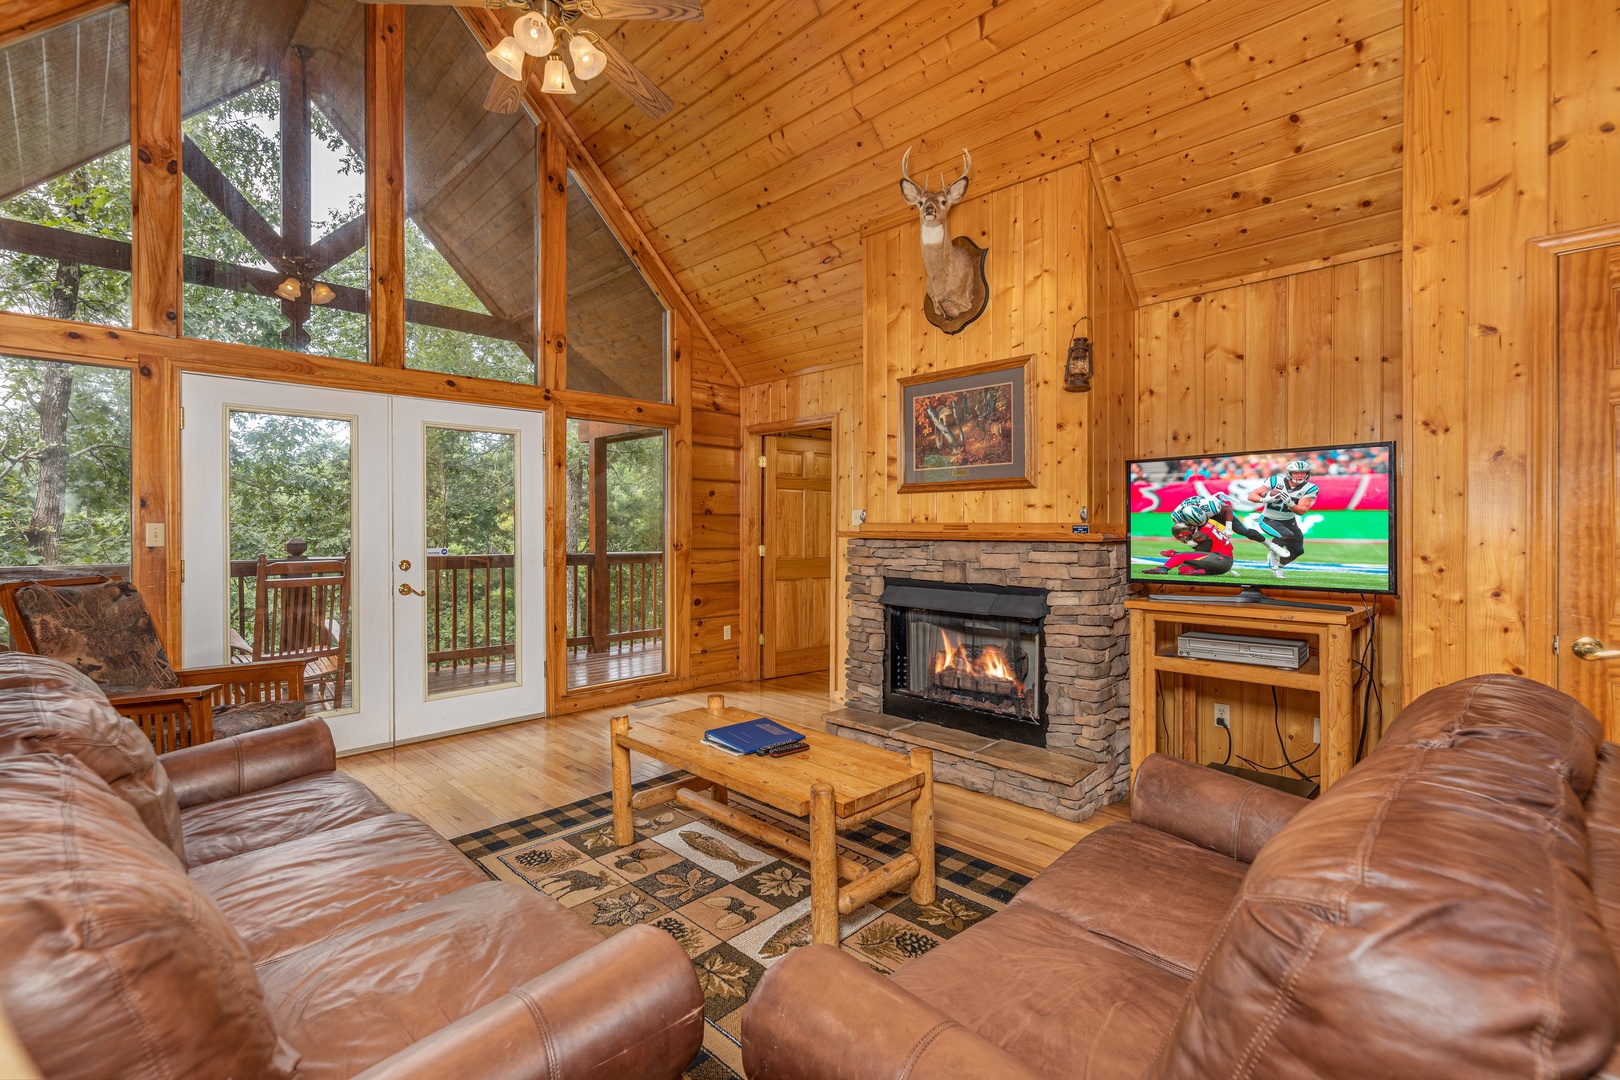 Living room with fireplace and TV at Wildlife Retreat, a 3 bedroom cabin rental located in Pigeon Forge